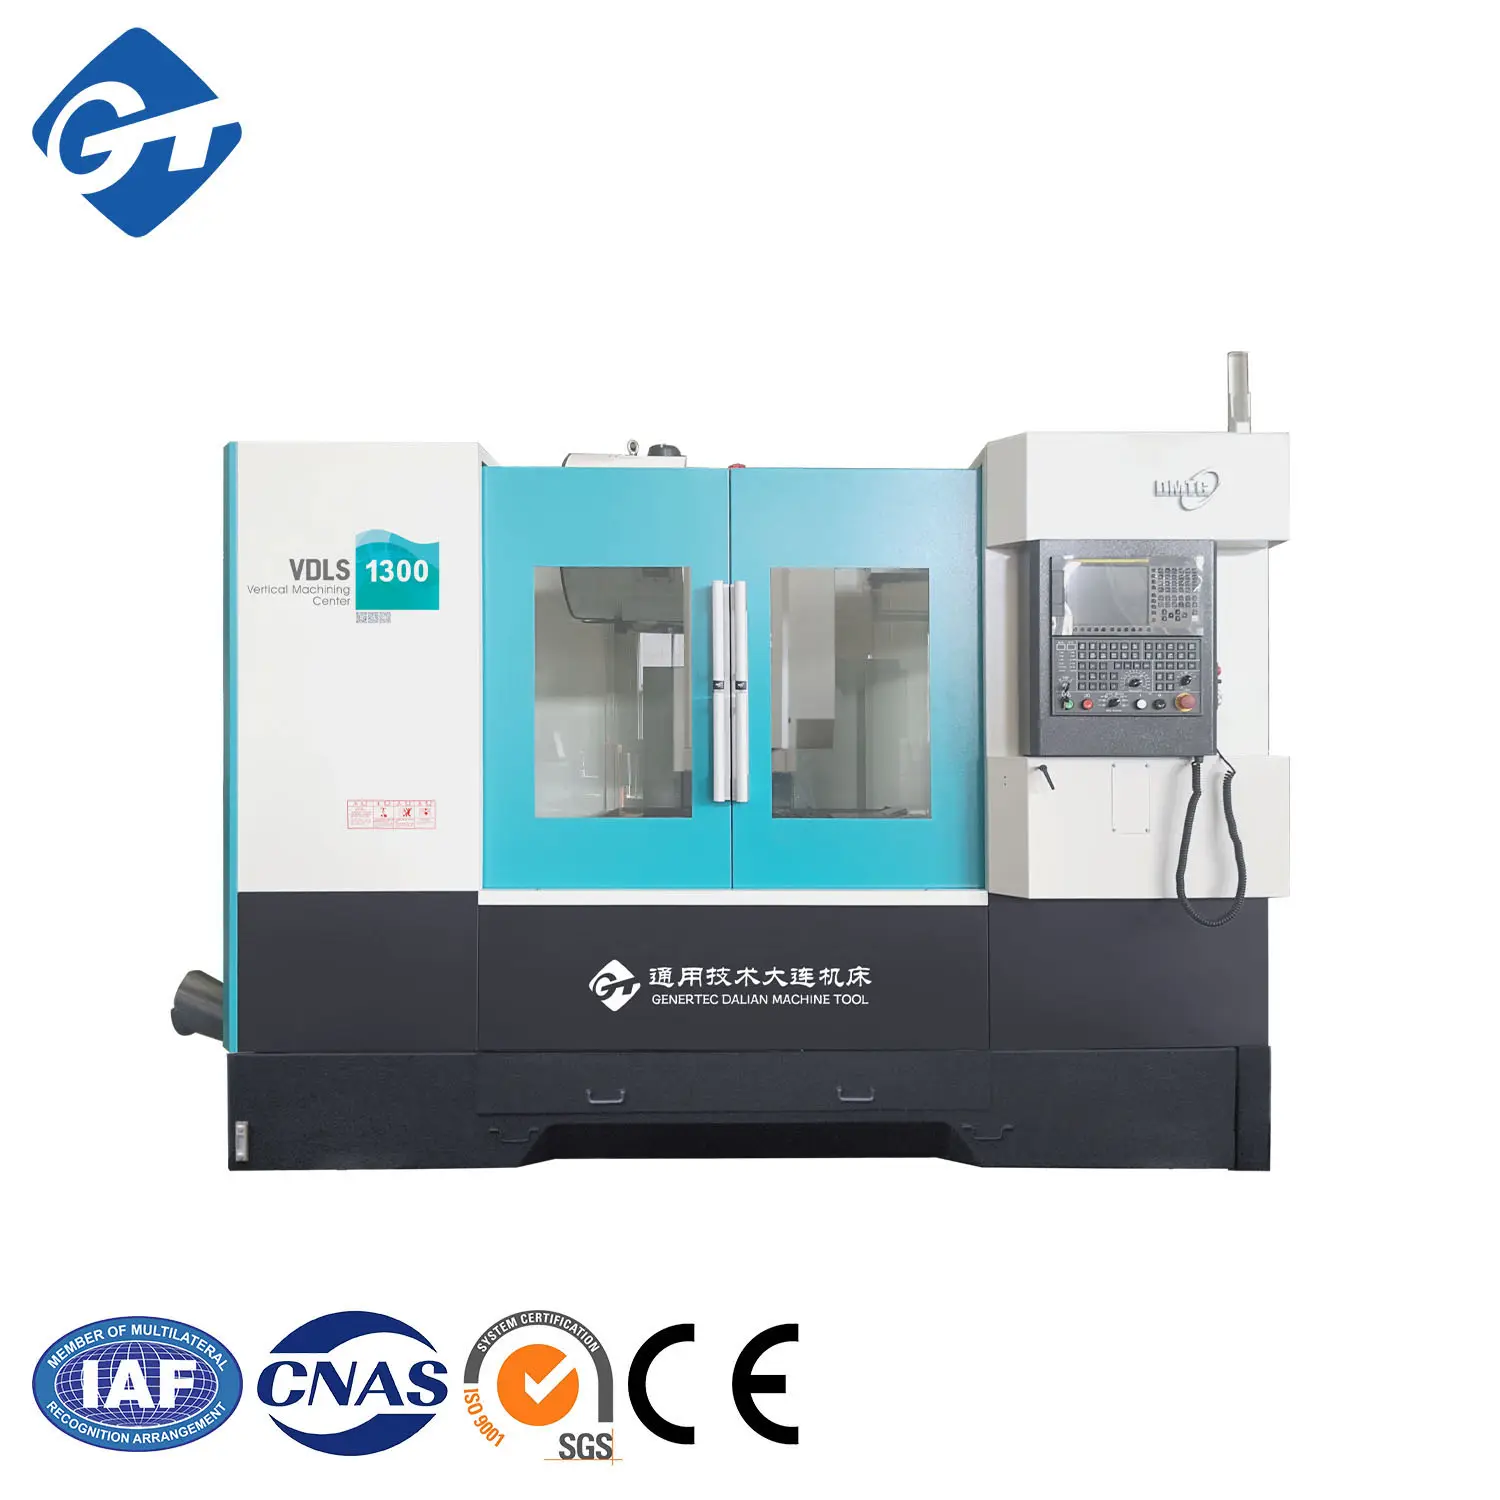 GT VMC1000 China 3 4 5 Axis CNC Milling Machine For Metal CNC Milling Machine Bt50 4 spindle Taper VM Machine Machining Centre